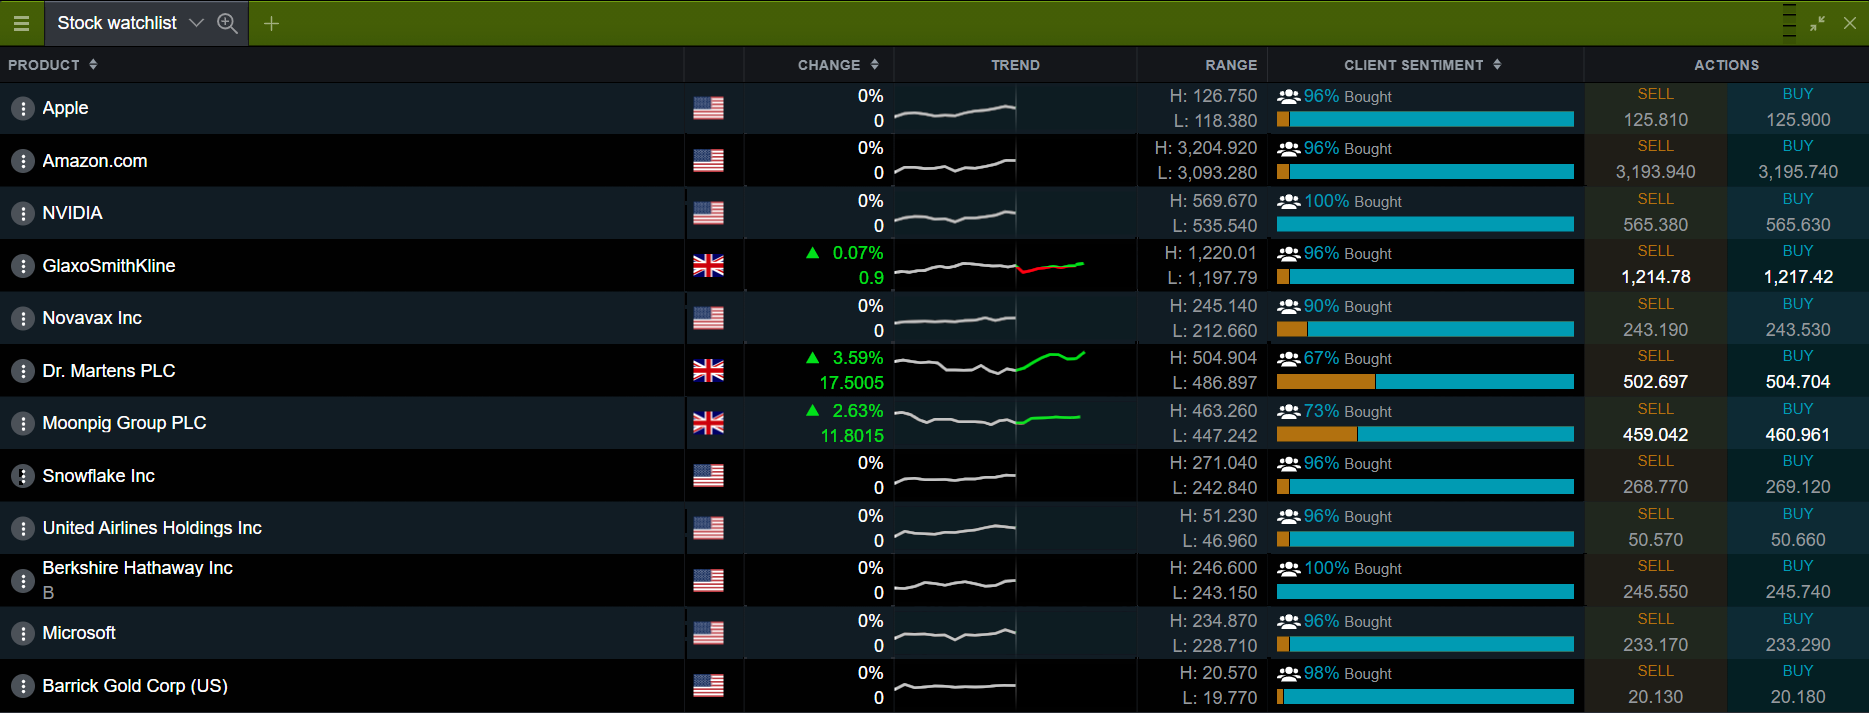 best website to watch stock prices